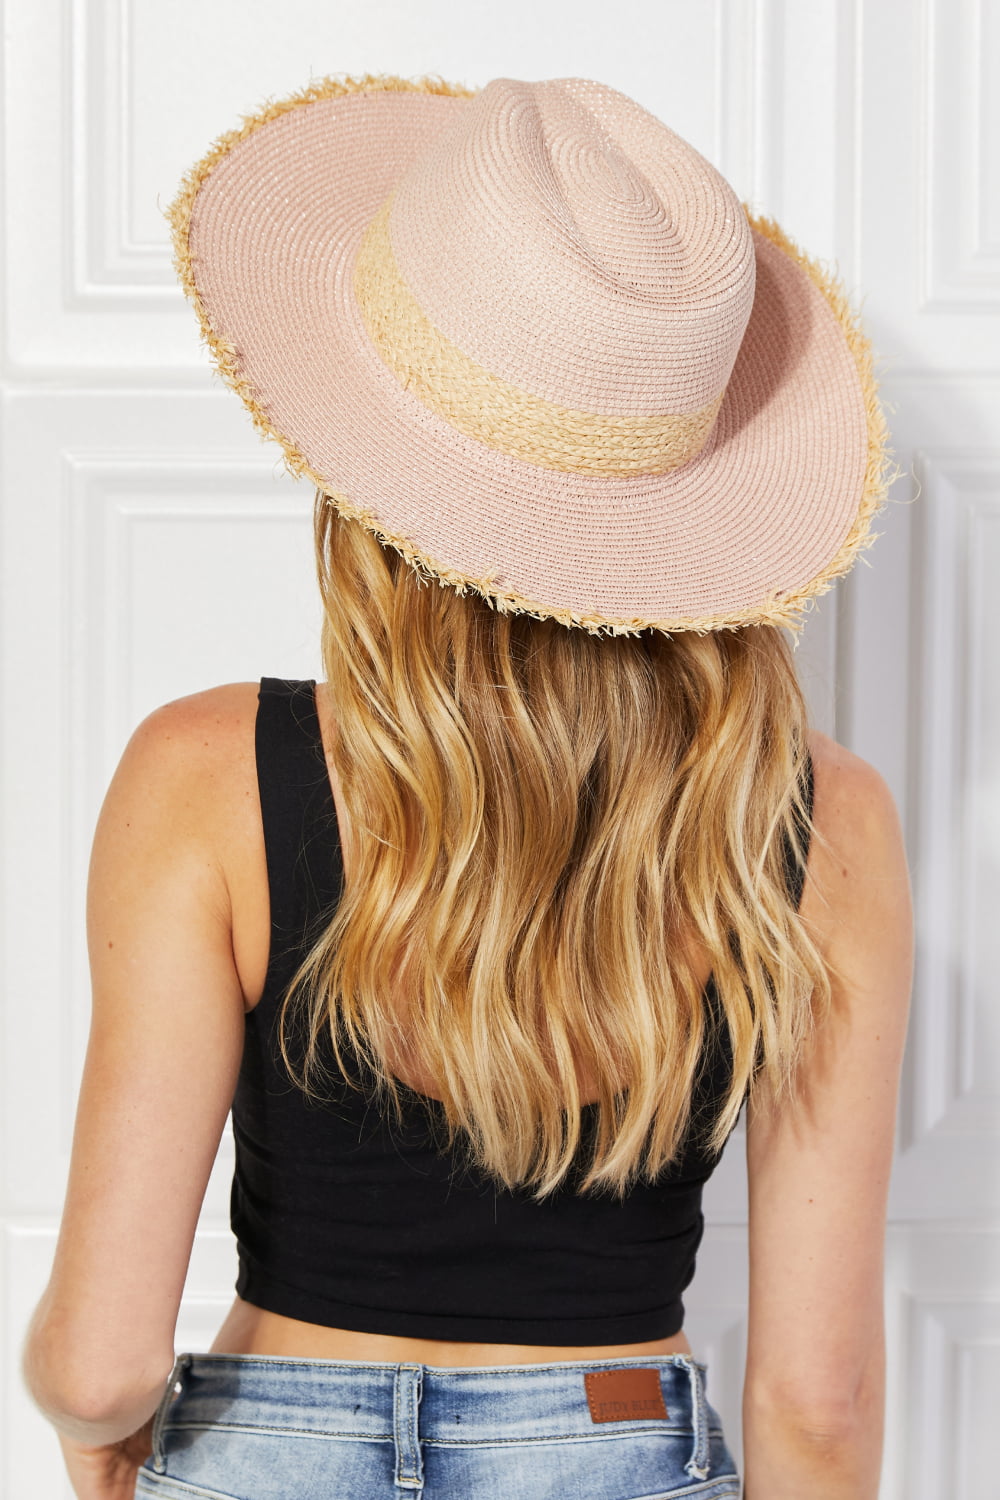 Justin Taylor Poolside Baby Straw Fedora Hat in Pale Blush - Cheeky Chic Boutique